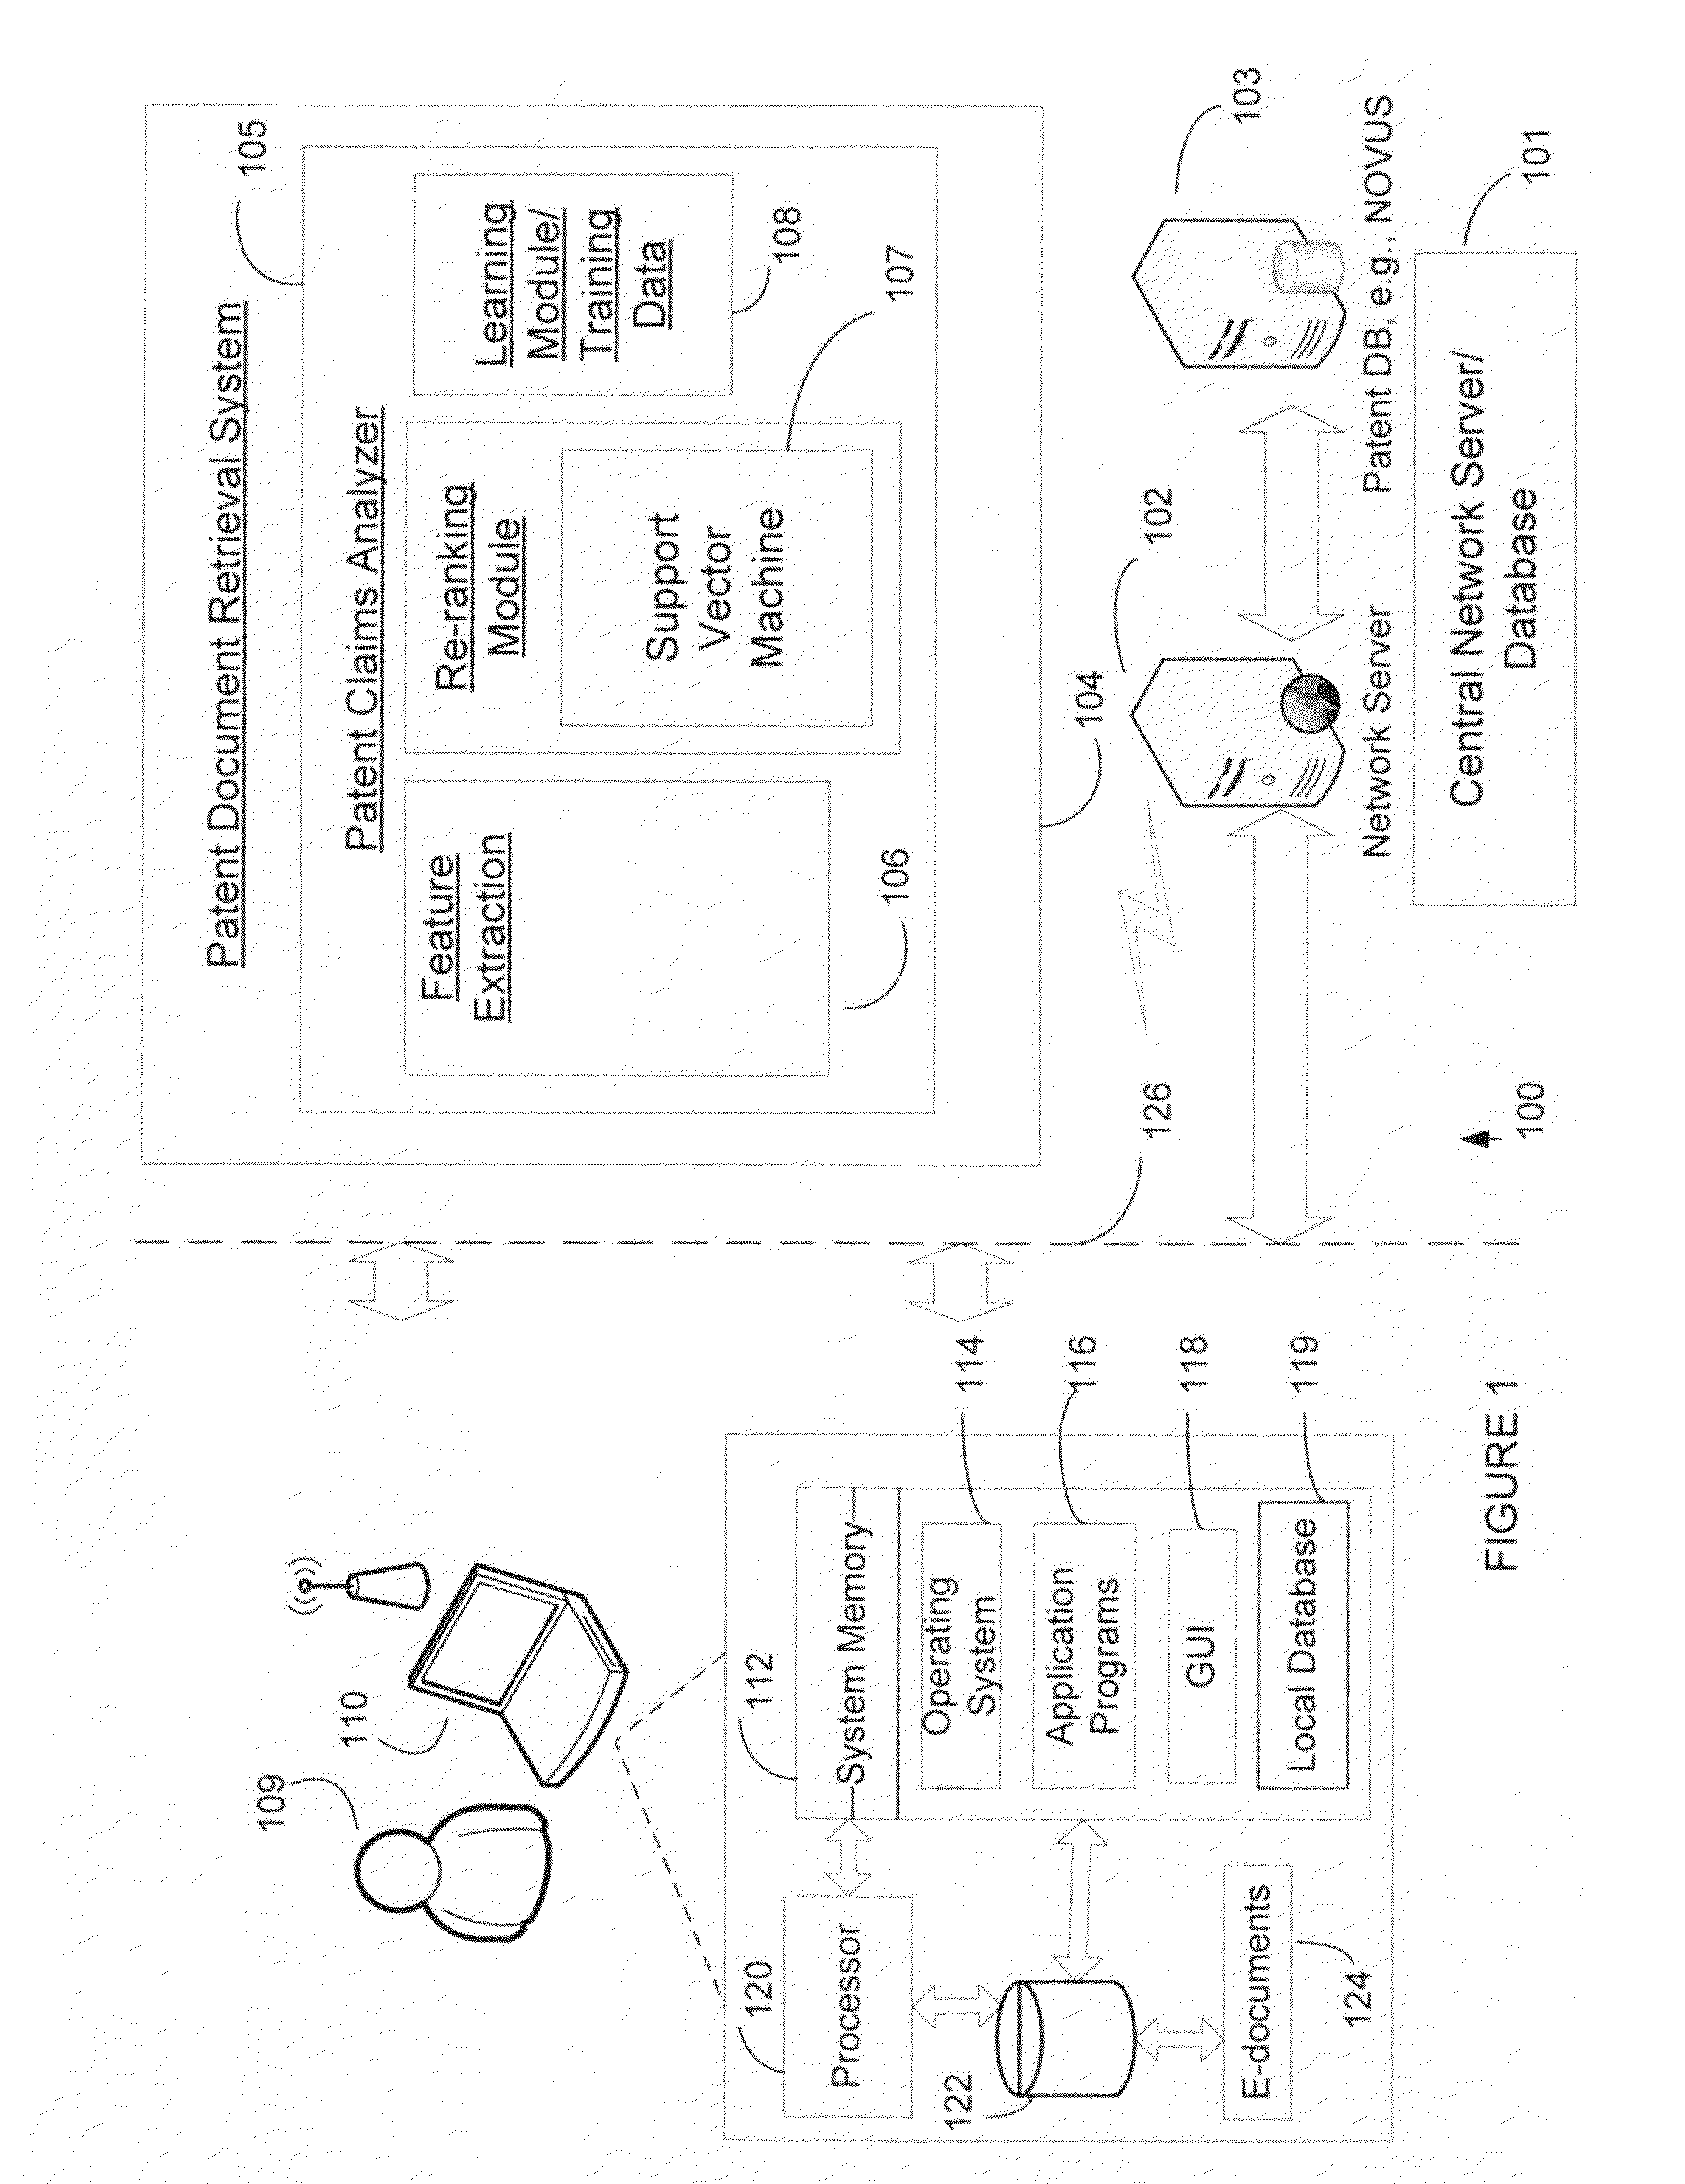 Method and system for ranking intellectual property documents using claim analysis